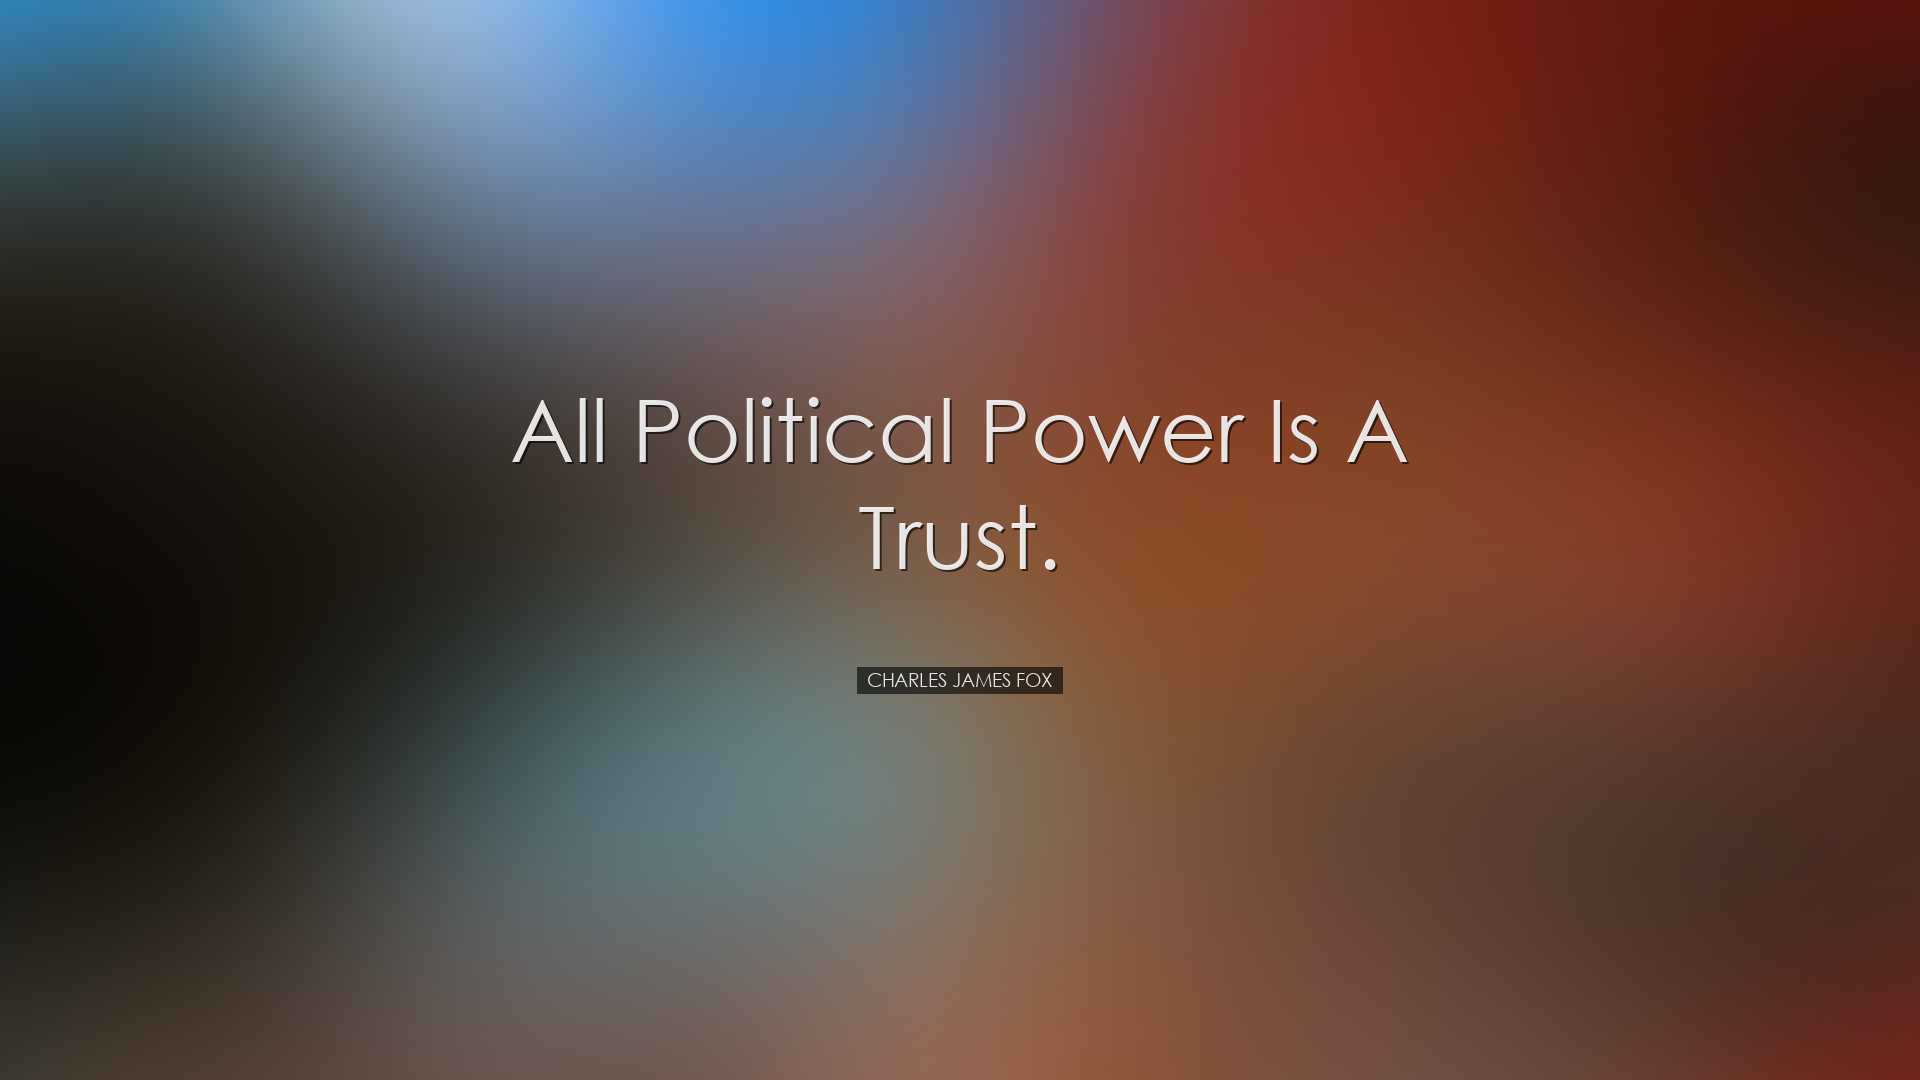 All political power is a trust. - Charles James Fox